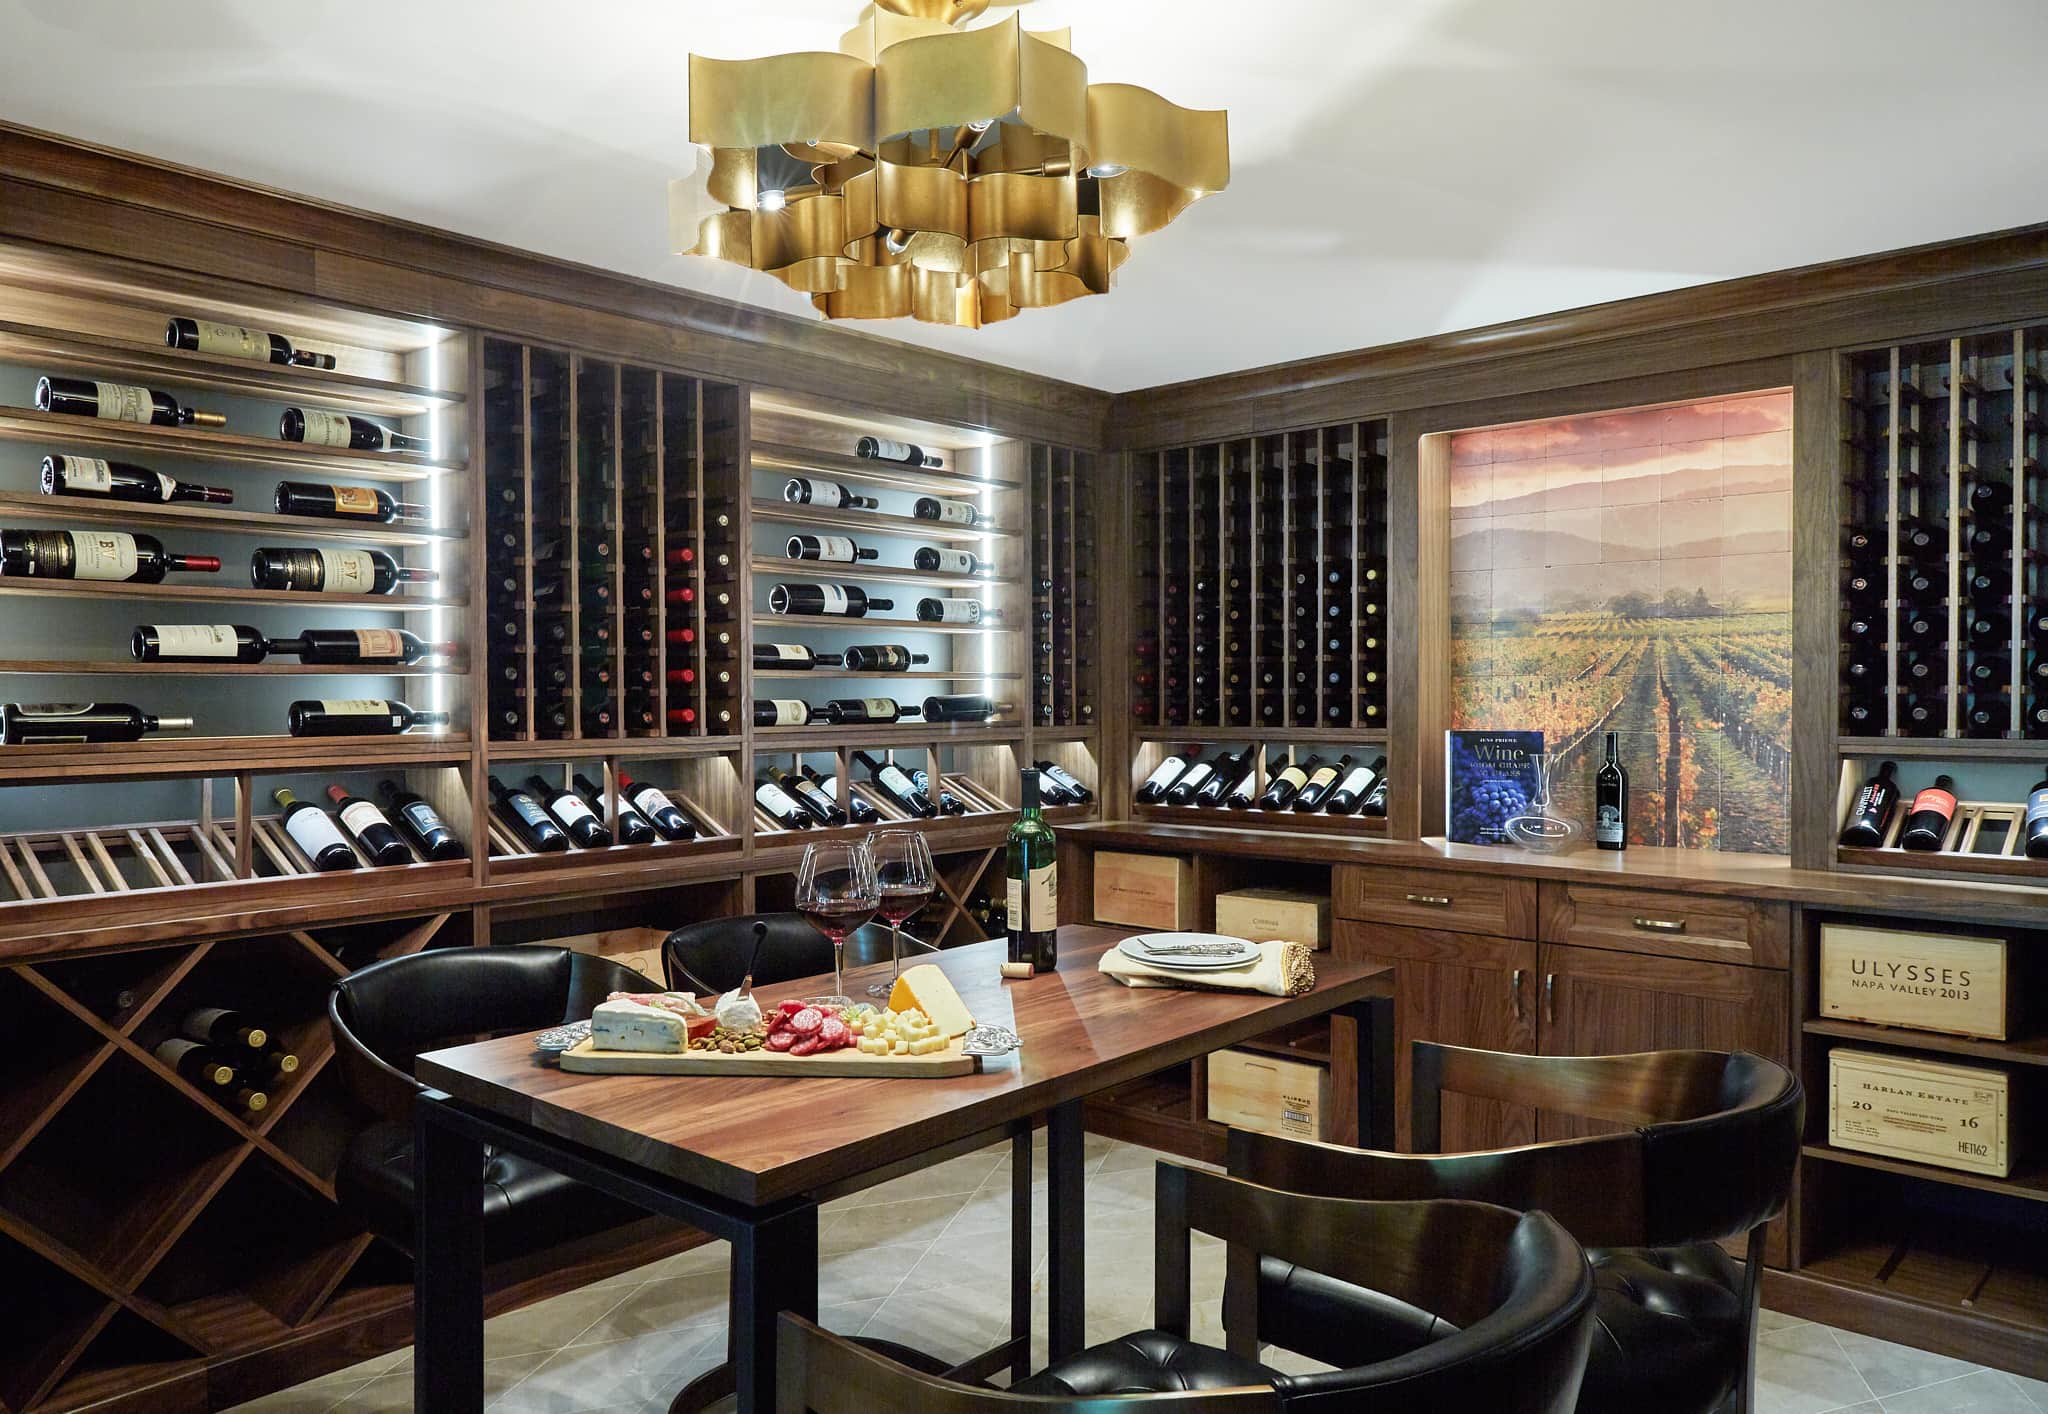 wine room with wood wine racks along the walls and a high tasting table in the center of the room.